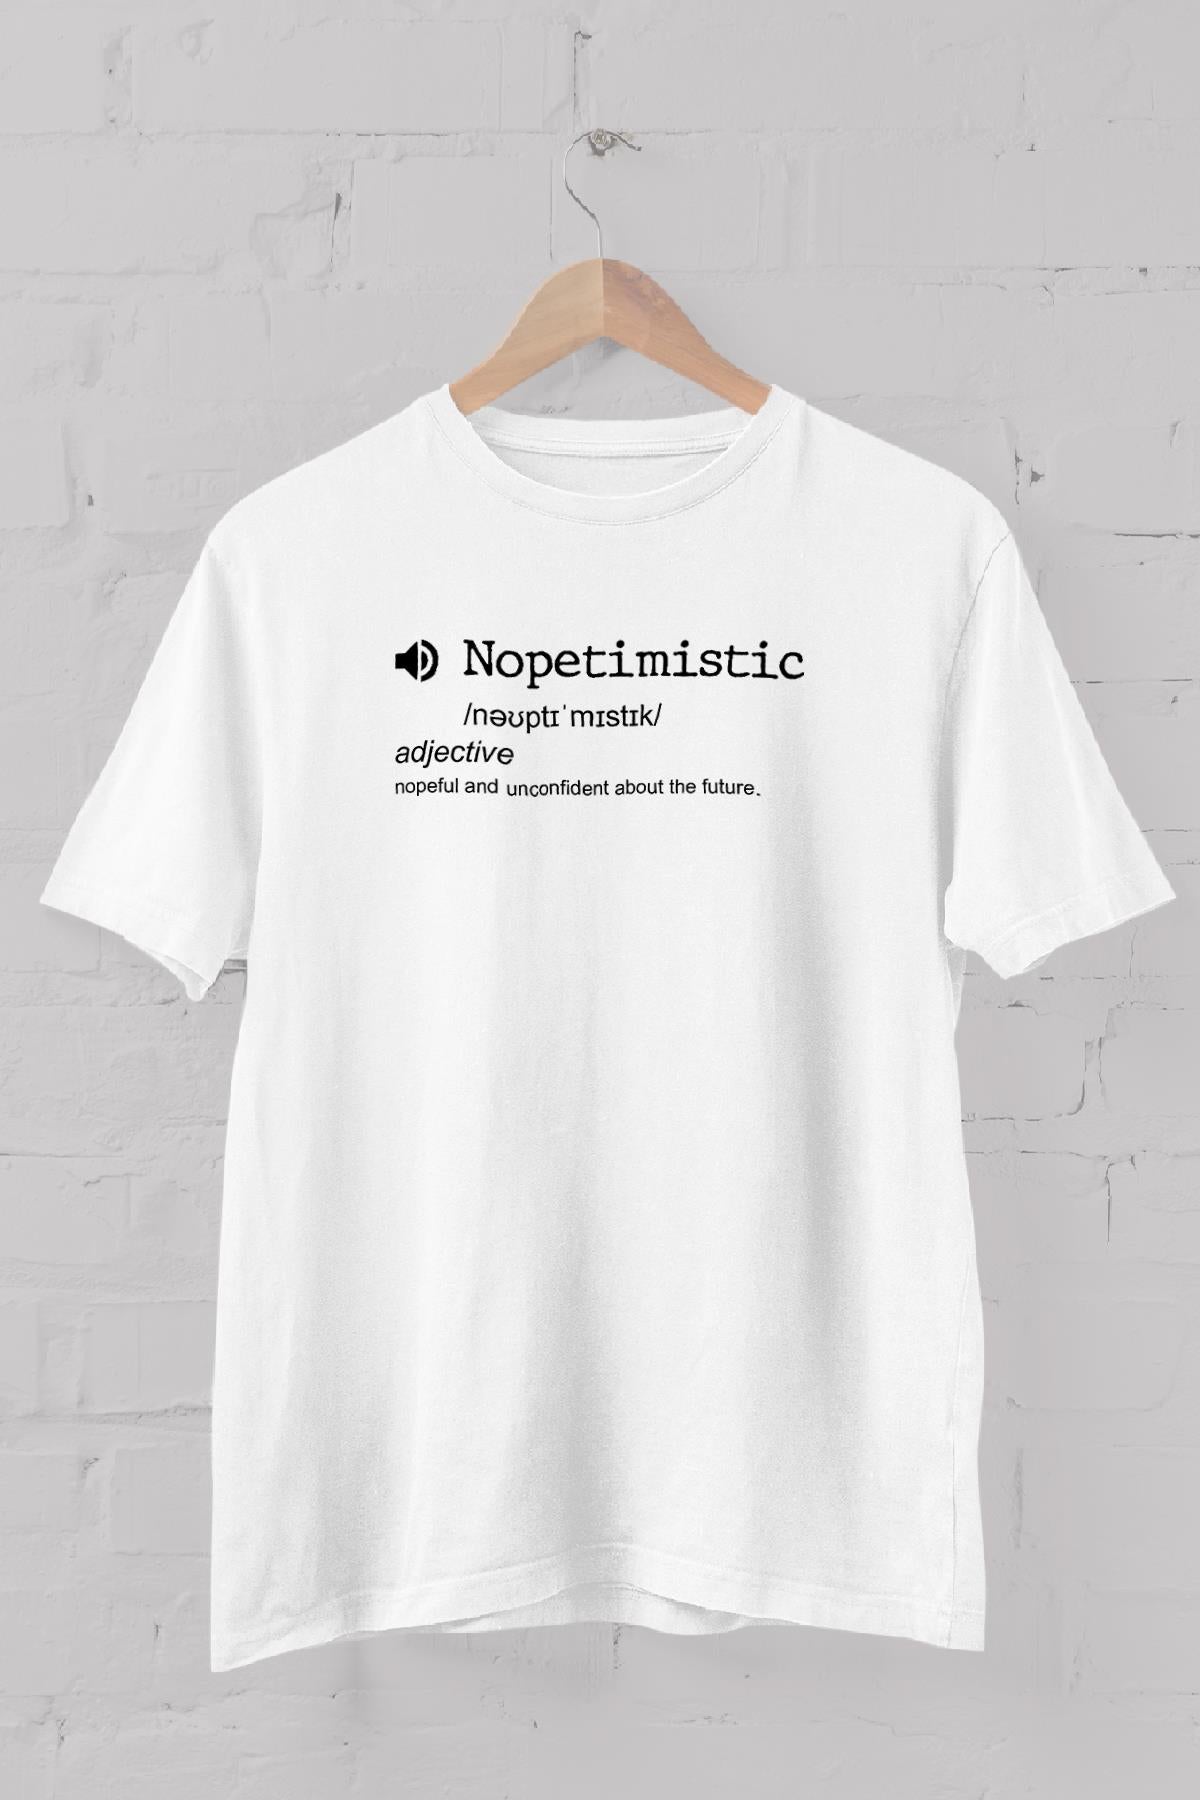 Fixed Words Dictionary "Nopetic" Printed Crew Neck Men's T -shirt